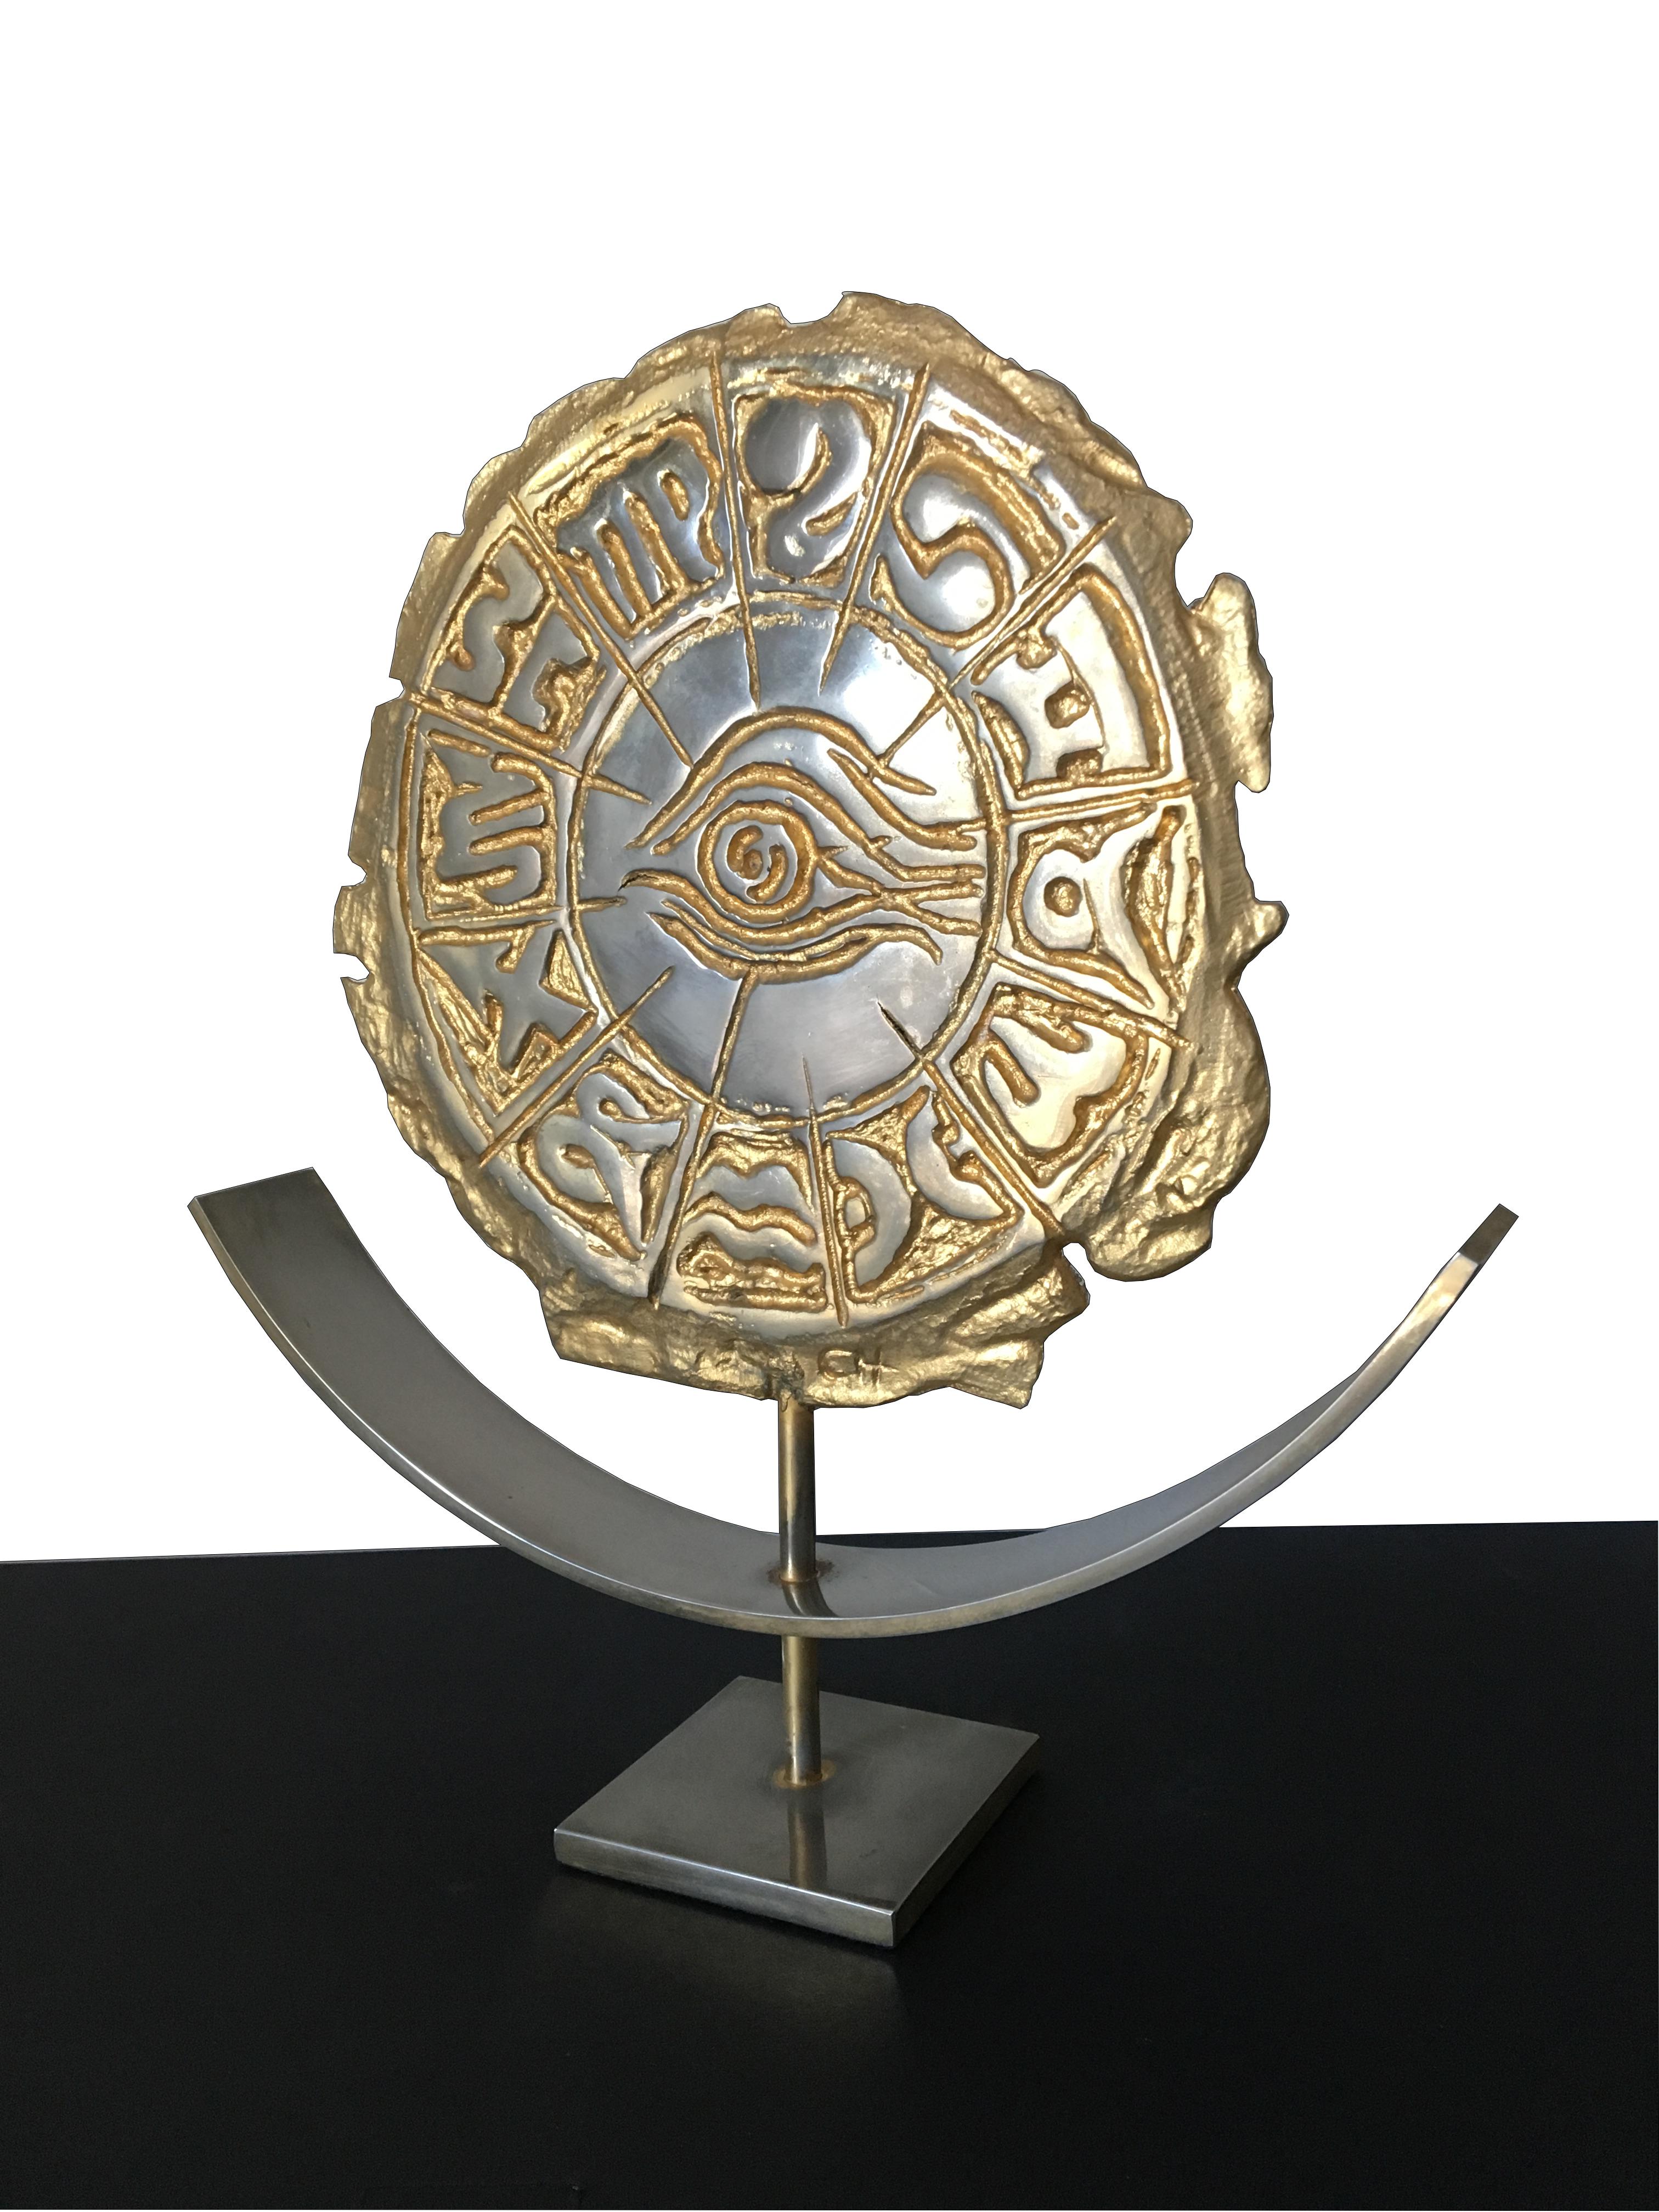 French Philippe Cheverny Zodiac Sculpture Signed Philippe Cherverny Cast Metal, Gilded For Sale